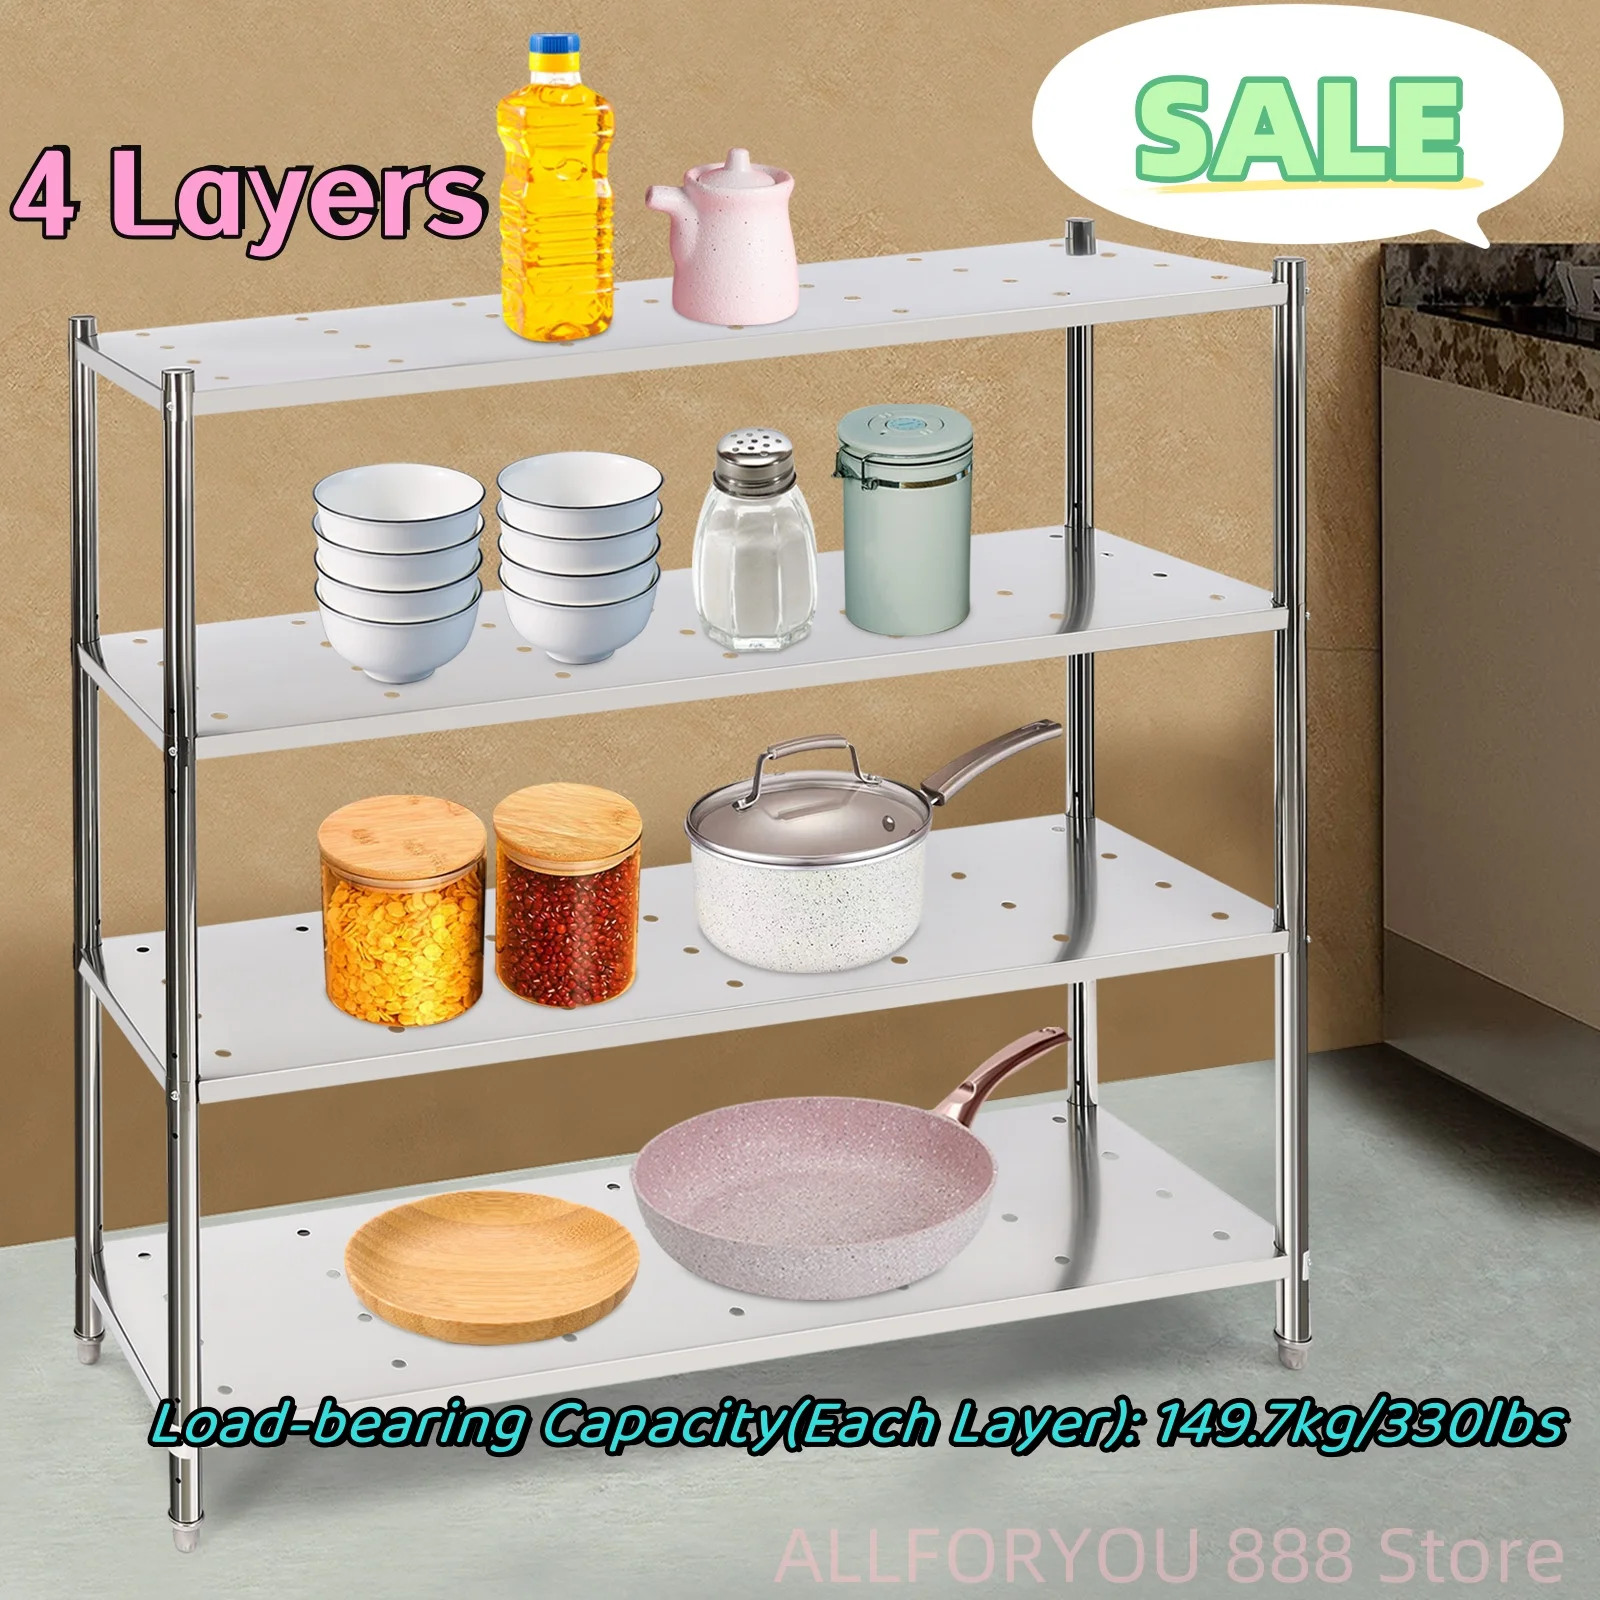 

4 Layers Stainless Steel Shelving Height Adjustable 149.7kg/330lbs Load-bearing Capacity(Each Layer)